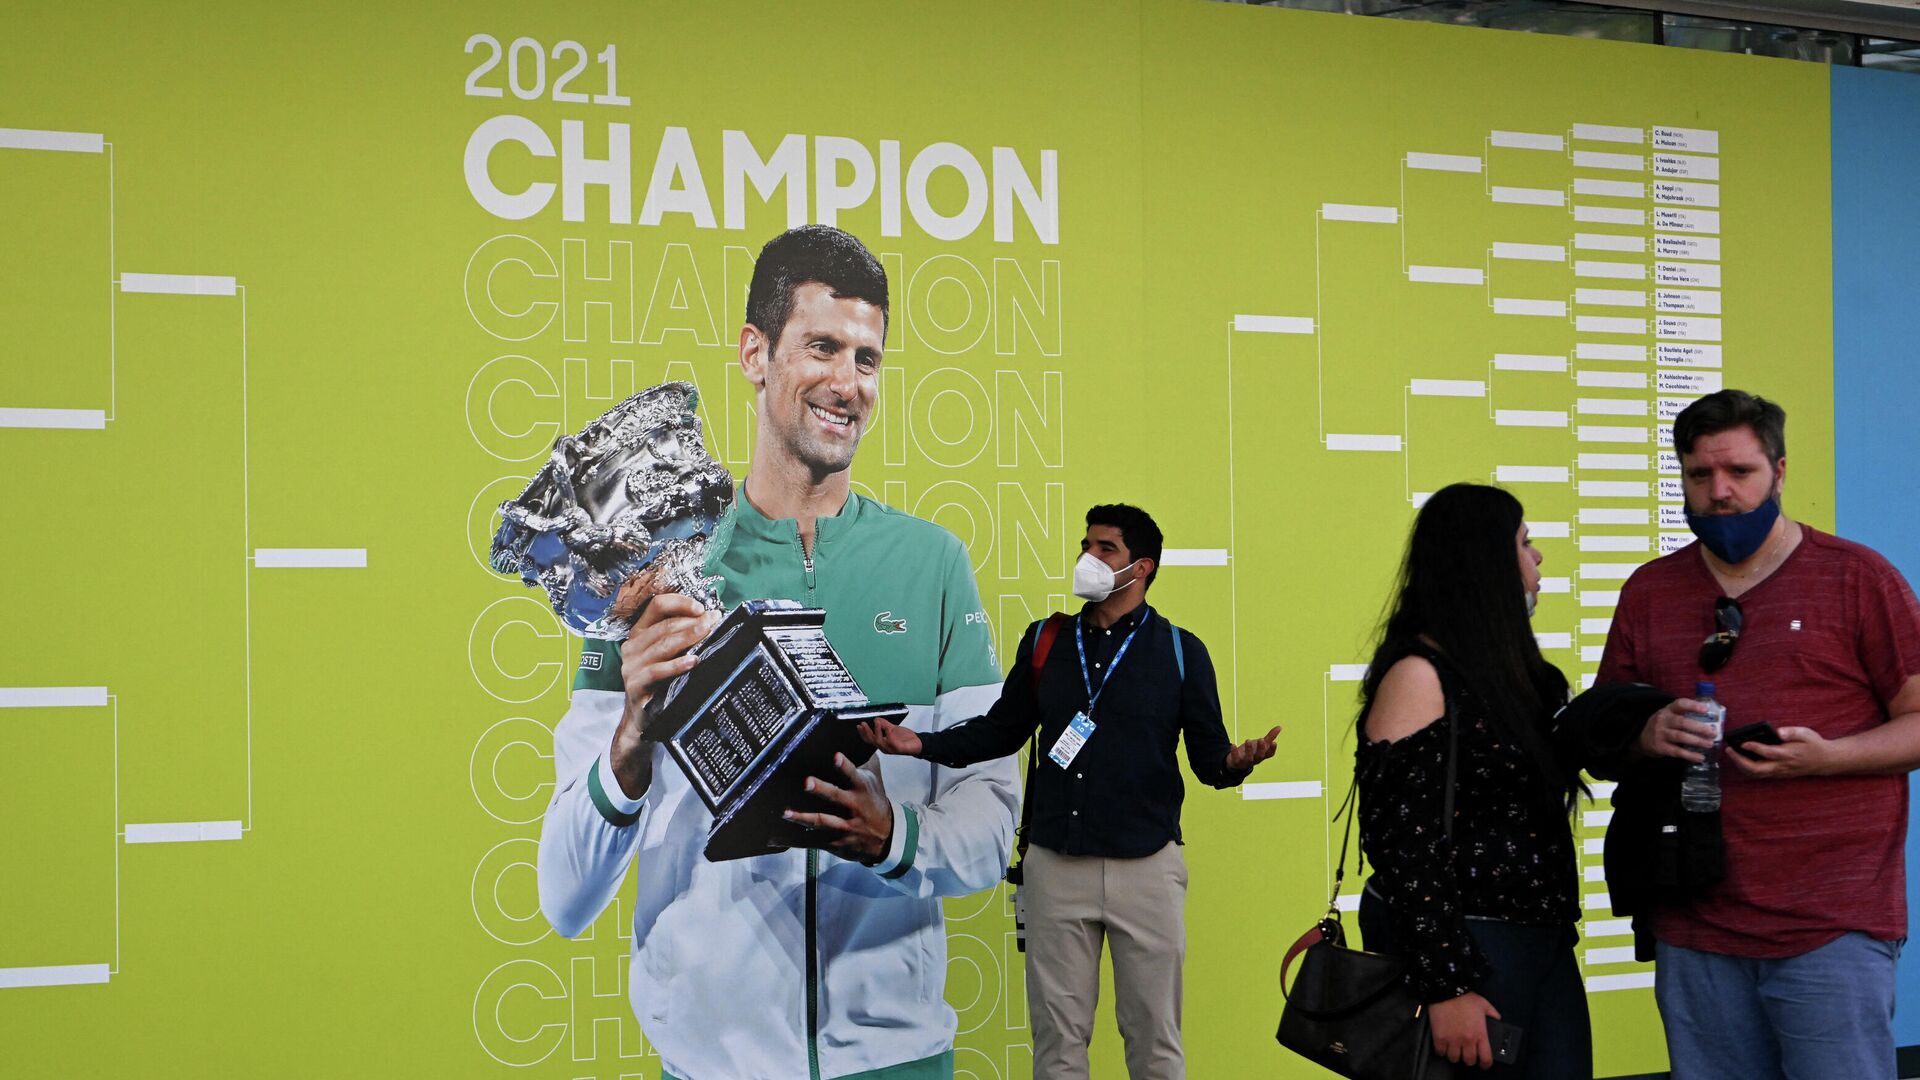 Tennis - Australian Open - Melbourne Park, Melbourne, Australia - January 17, 2022 People are seen in front of an image of Novak Djokovic on the first day of the Australian Open at Melbourne Park - Sputnik International, 1920, 17.01.2022